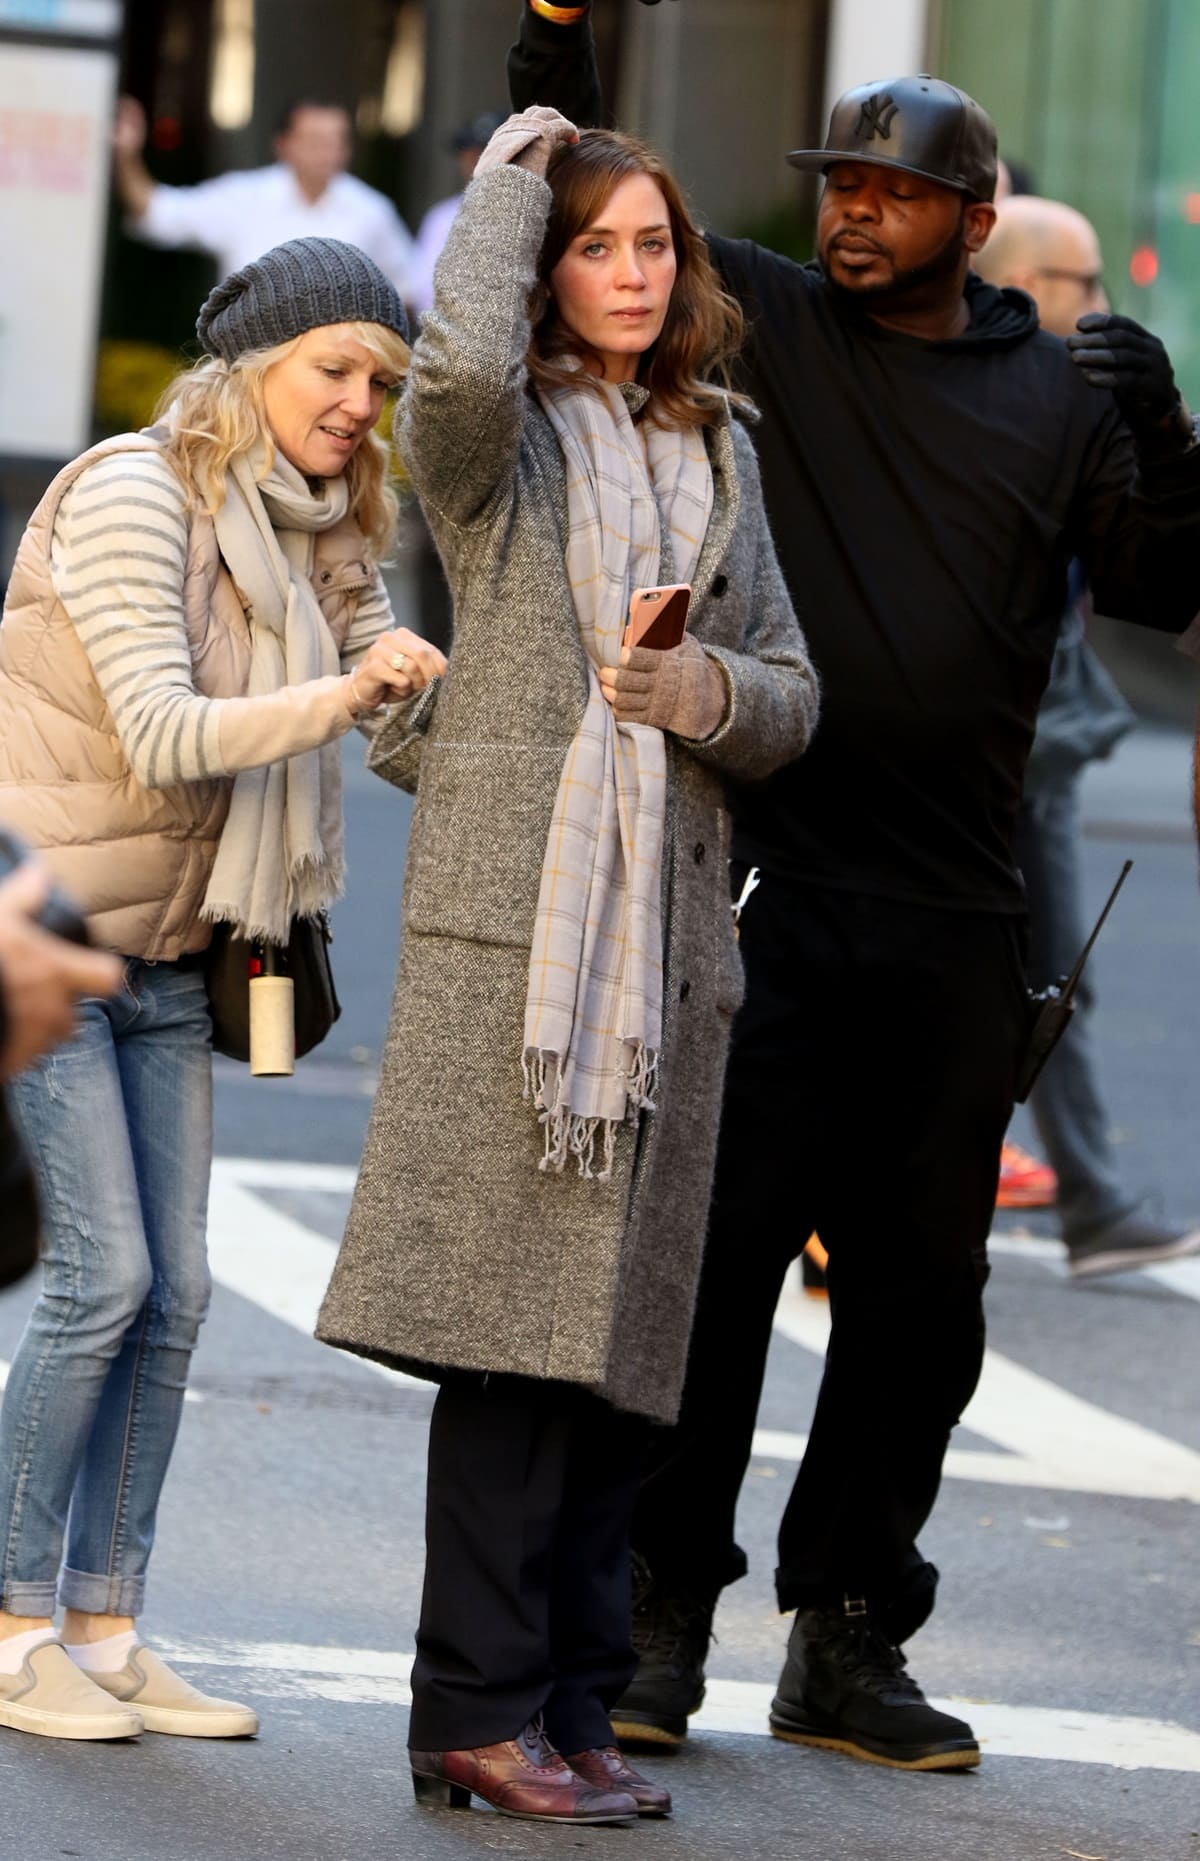 Emily Blunt in character as Rachel Watson on the set of The Girl on the Train in New York City, November 4, 2015